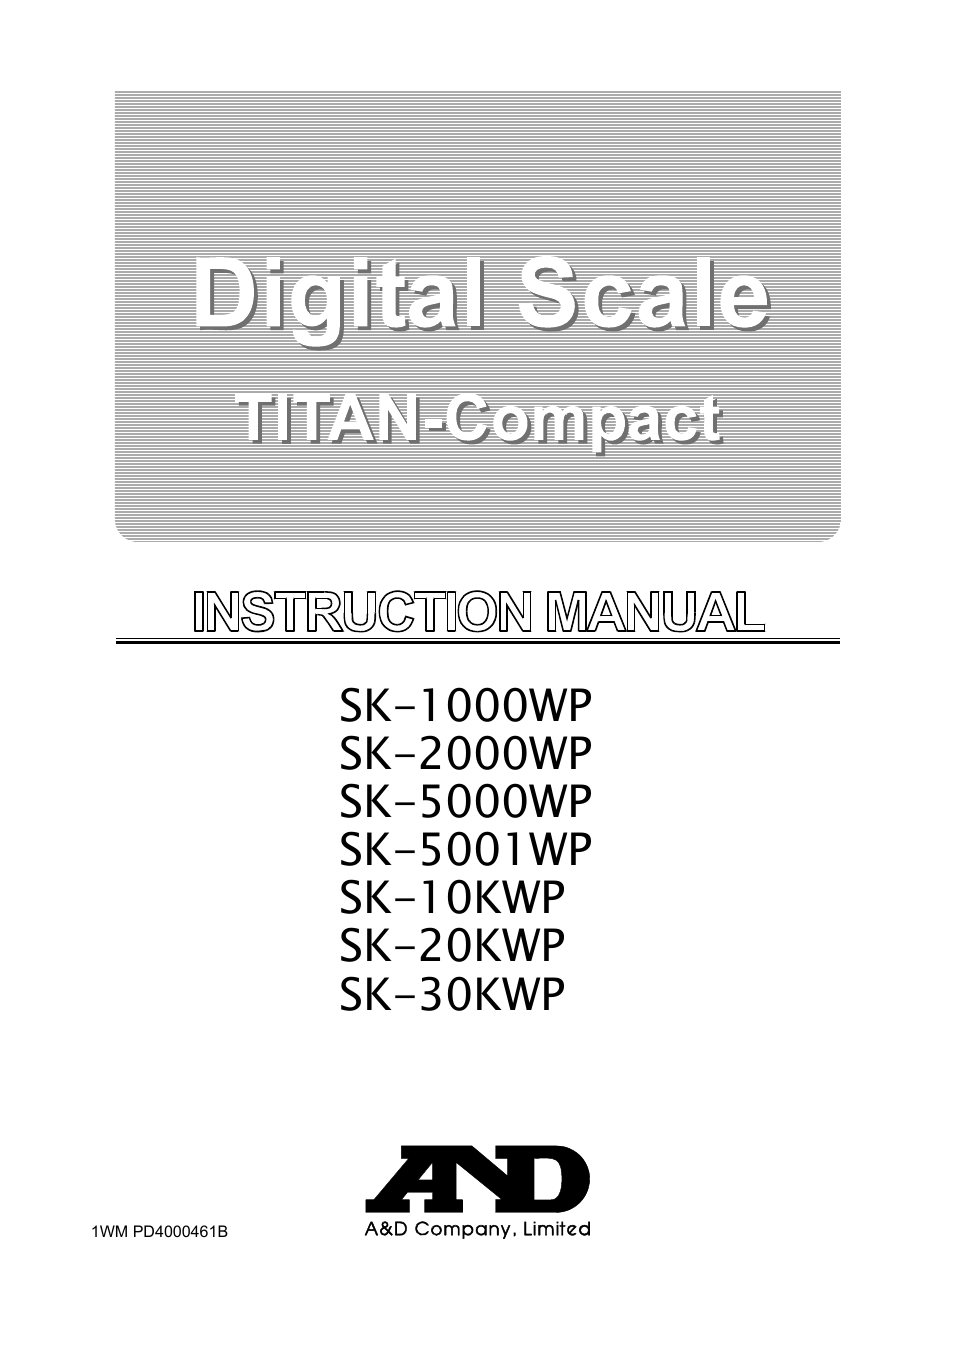 Digital Scale SK-5001WP (Page 1)